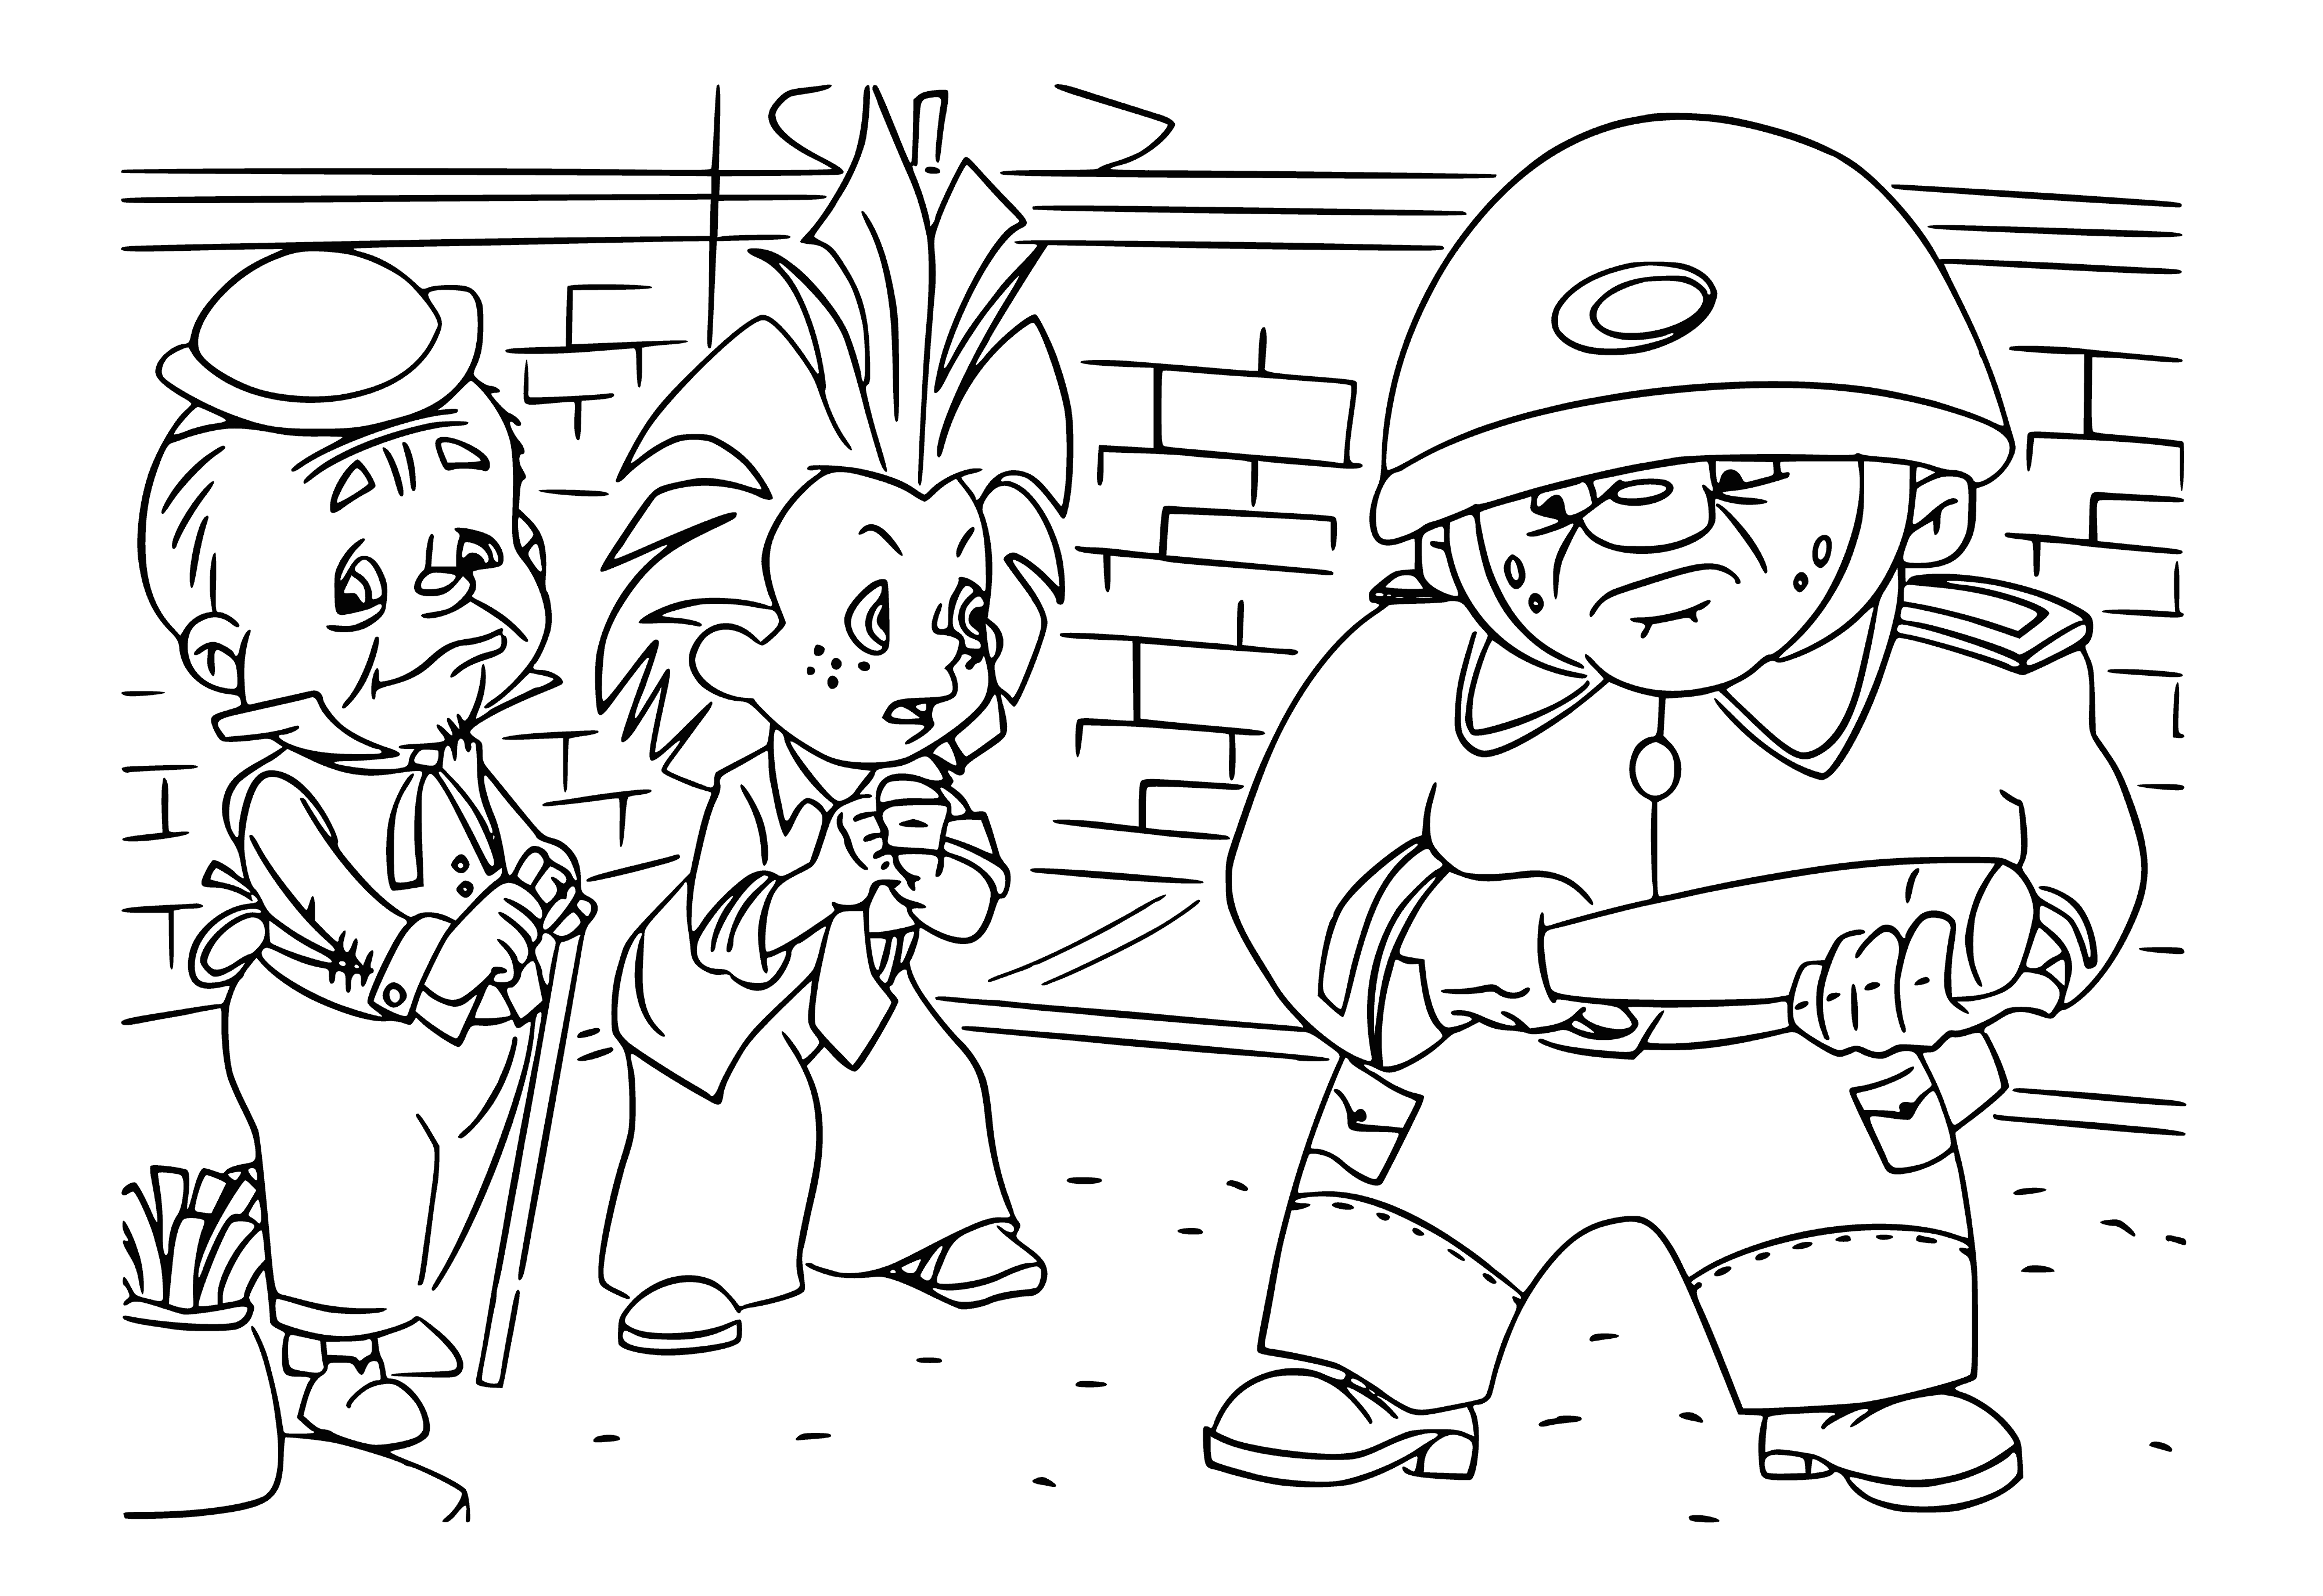 coloring page: Two figures converse on the surface of a big, blue-grey moon in the center of a coloring page. One is a small, childlike creature wearing a red cap, and the other is a large, burly man with a mustache wearing a blue uniform. #conversation